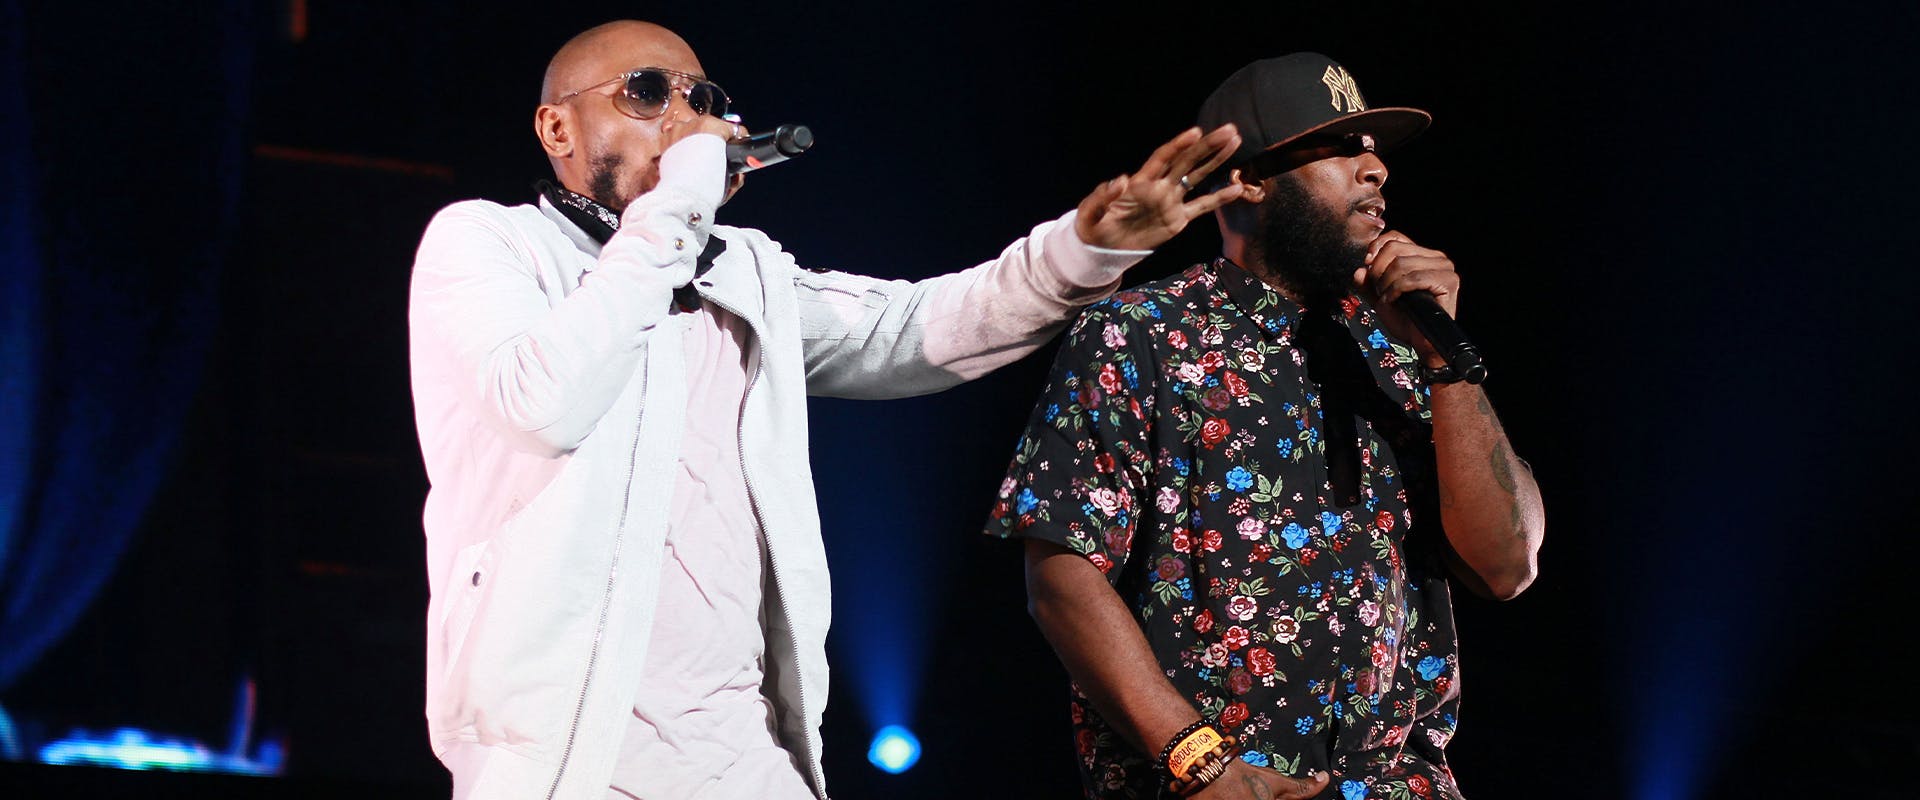 Mos Def and Talib Kweli perform as part of the benefit concert, 'Power To The People' at Coliseo Jose M. Agrelot on March 18, 2018 in San Juan, Puerto Rico. (Photo by Gladys Vega/Getty Images)